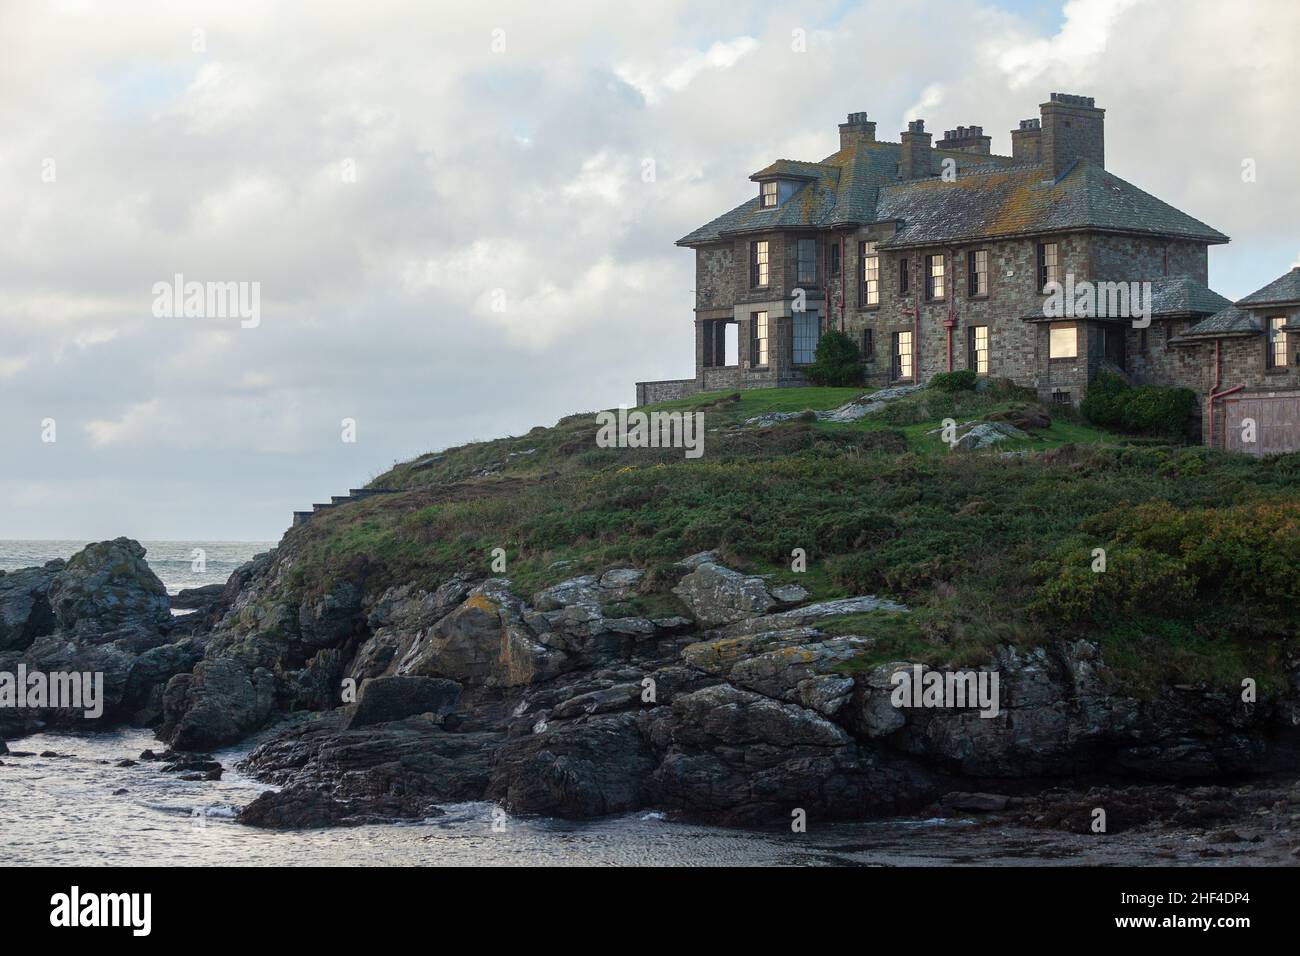 Large grey house overlooking the sea at Trearddur Bay, Anglesey, Wales Stock Photo